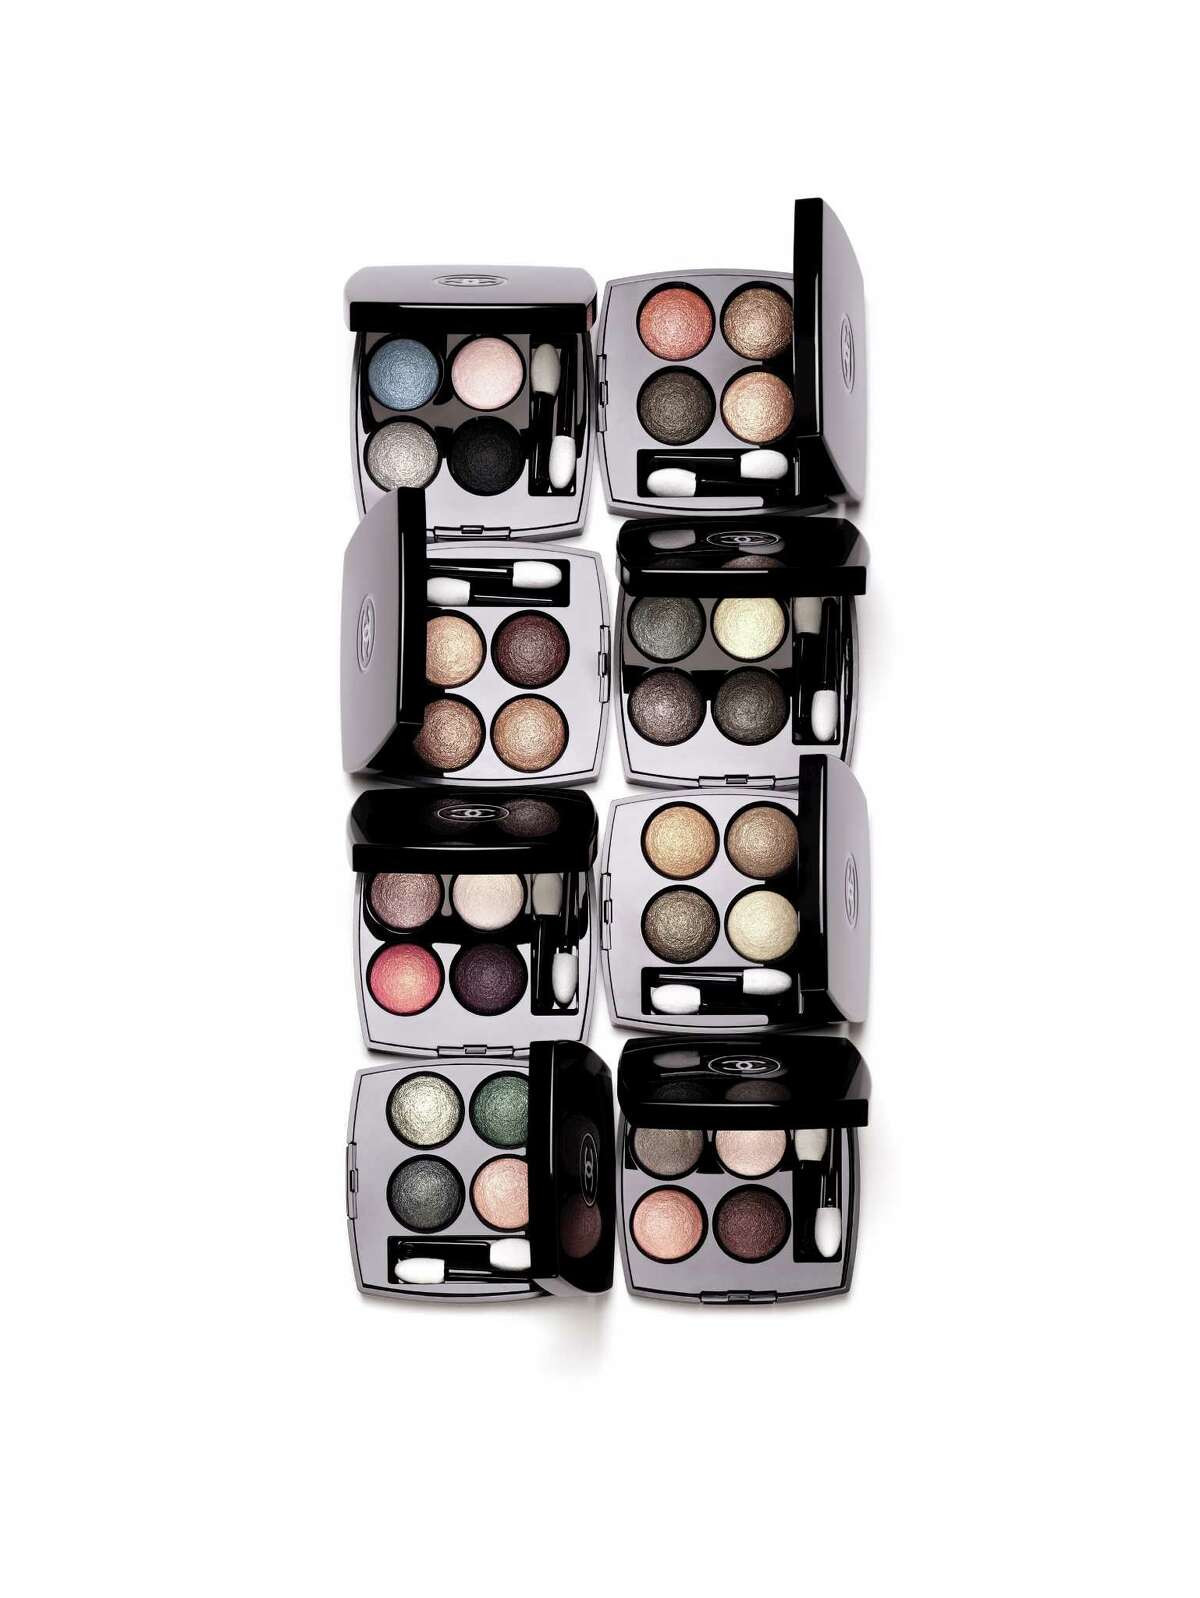 CHANEL Les 4 Ombres Tweed Limited-Edition Multi-Effect Quadra